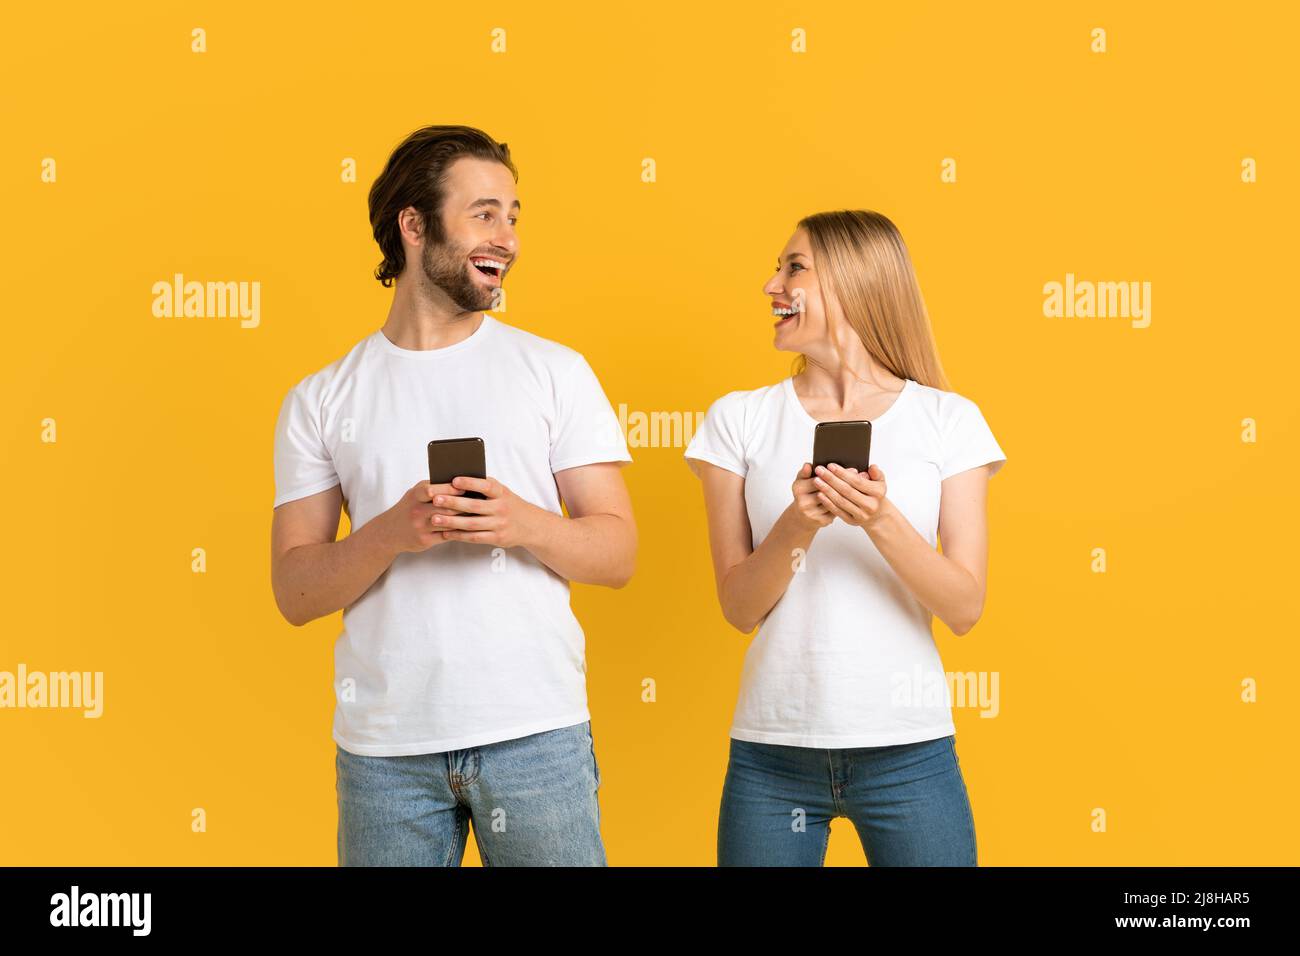 Cheerful millennial caucasian female and male in white t-shirts look at each other, hold phones Stock Photo